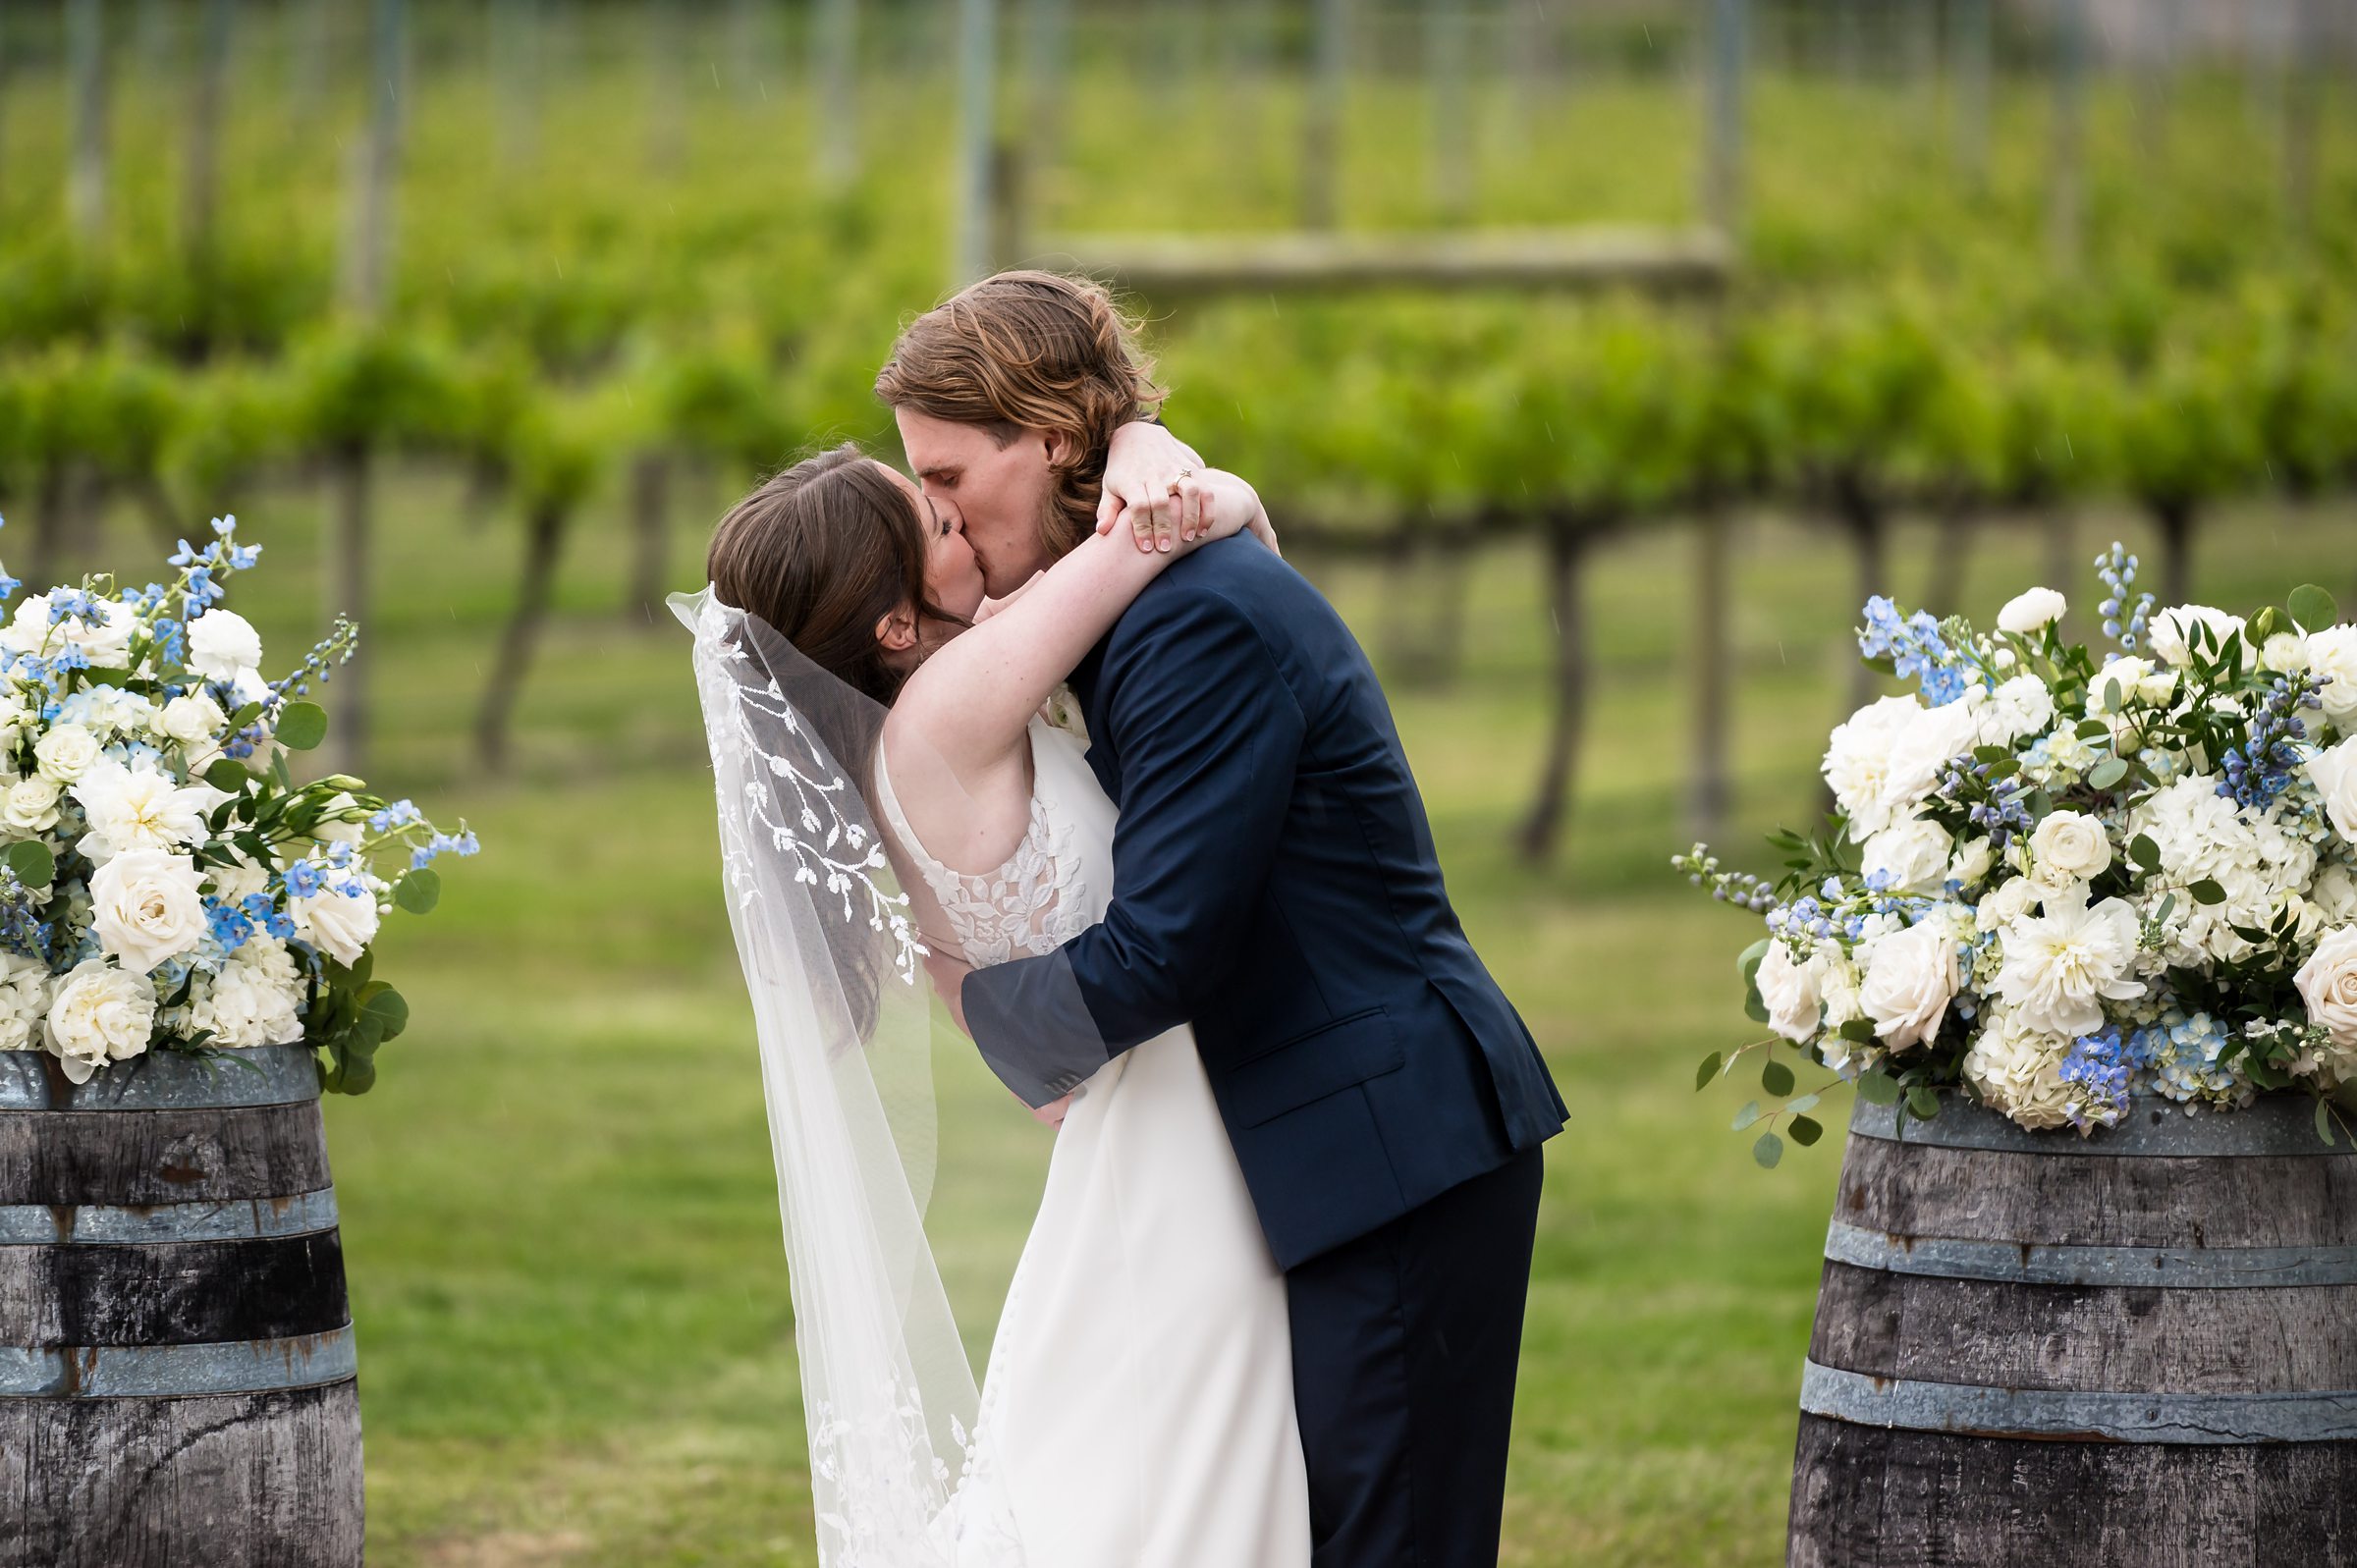 A bride and groom kiss during their outdoor wedding ceremony, surrounded by floral arrangements on wooden barrels and a backdrop of vineyard rows.